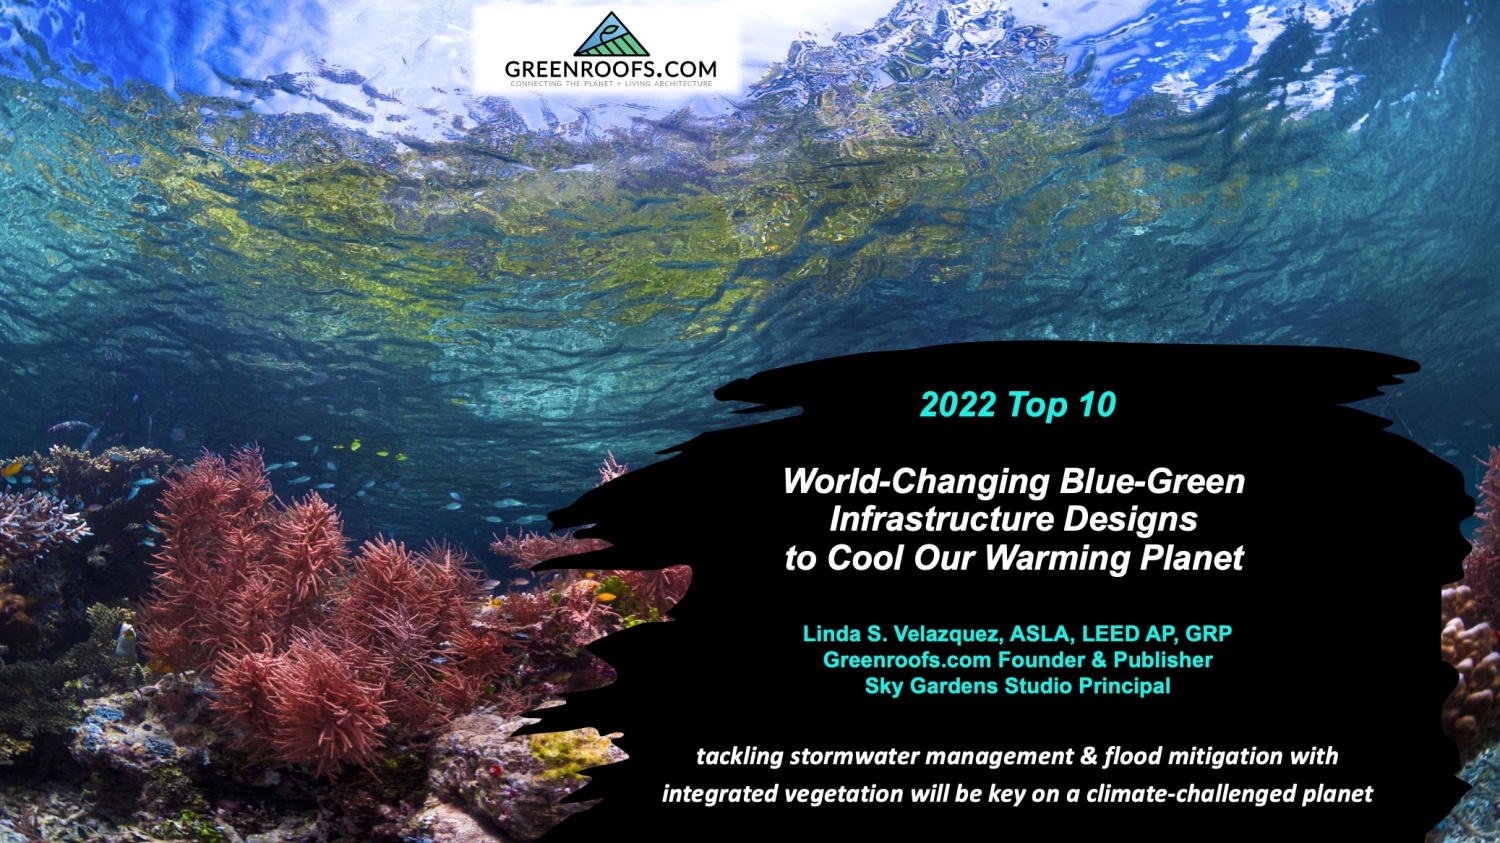 Top 10 World-Changing Blue-Green Infrastructure Designs to Cool Our Warming Planet